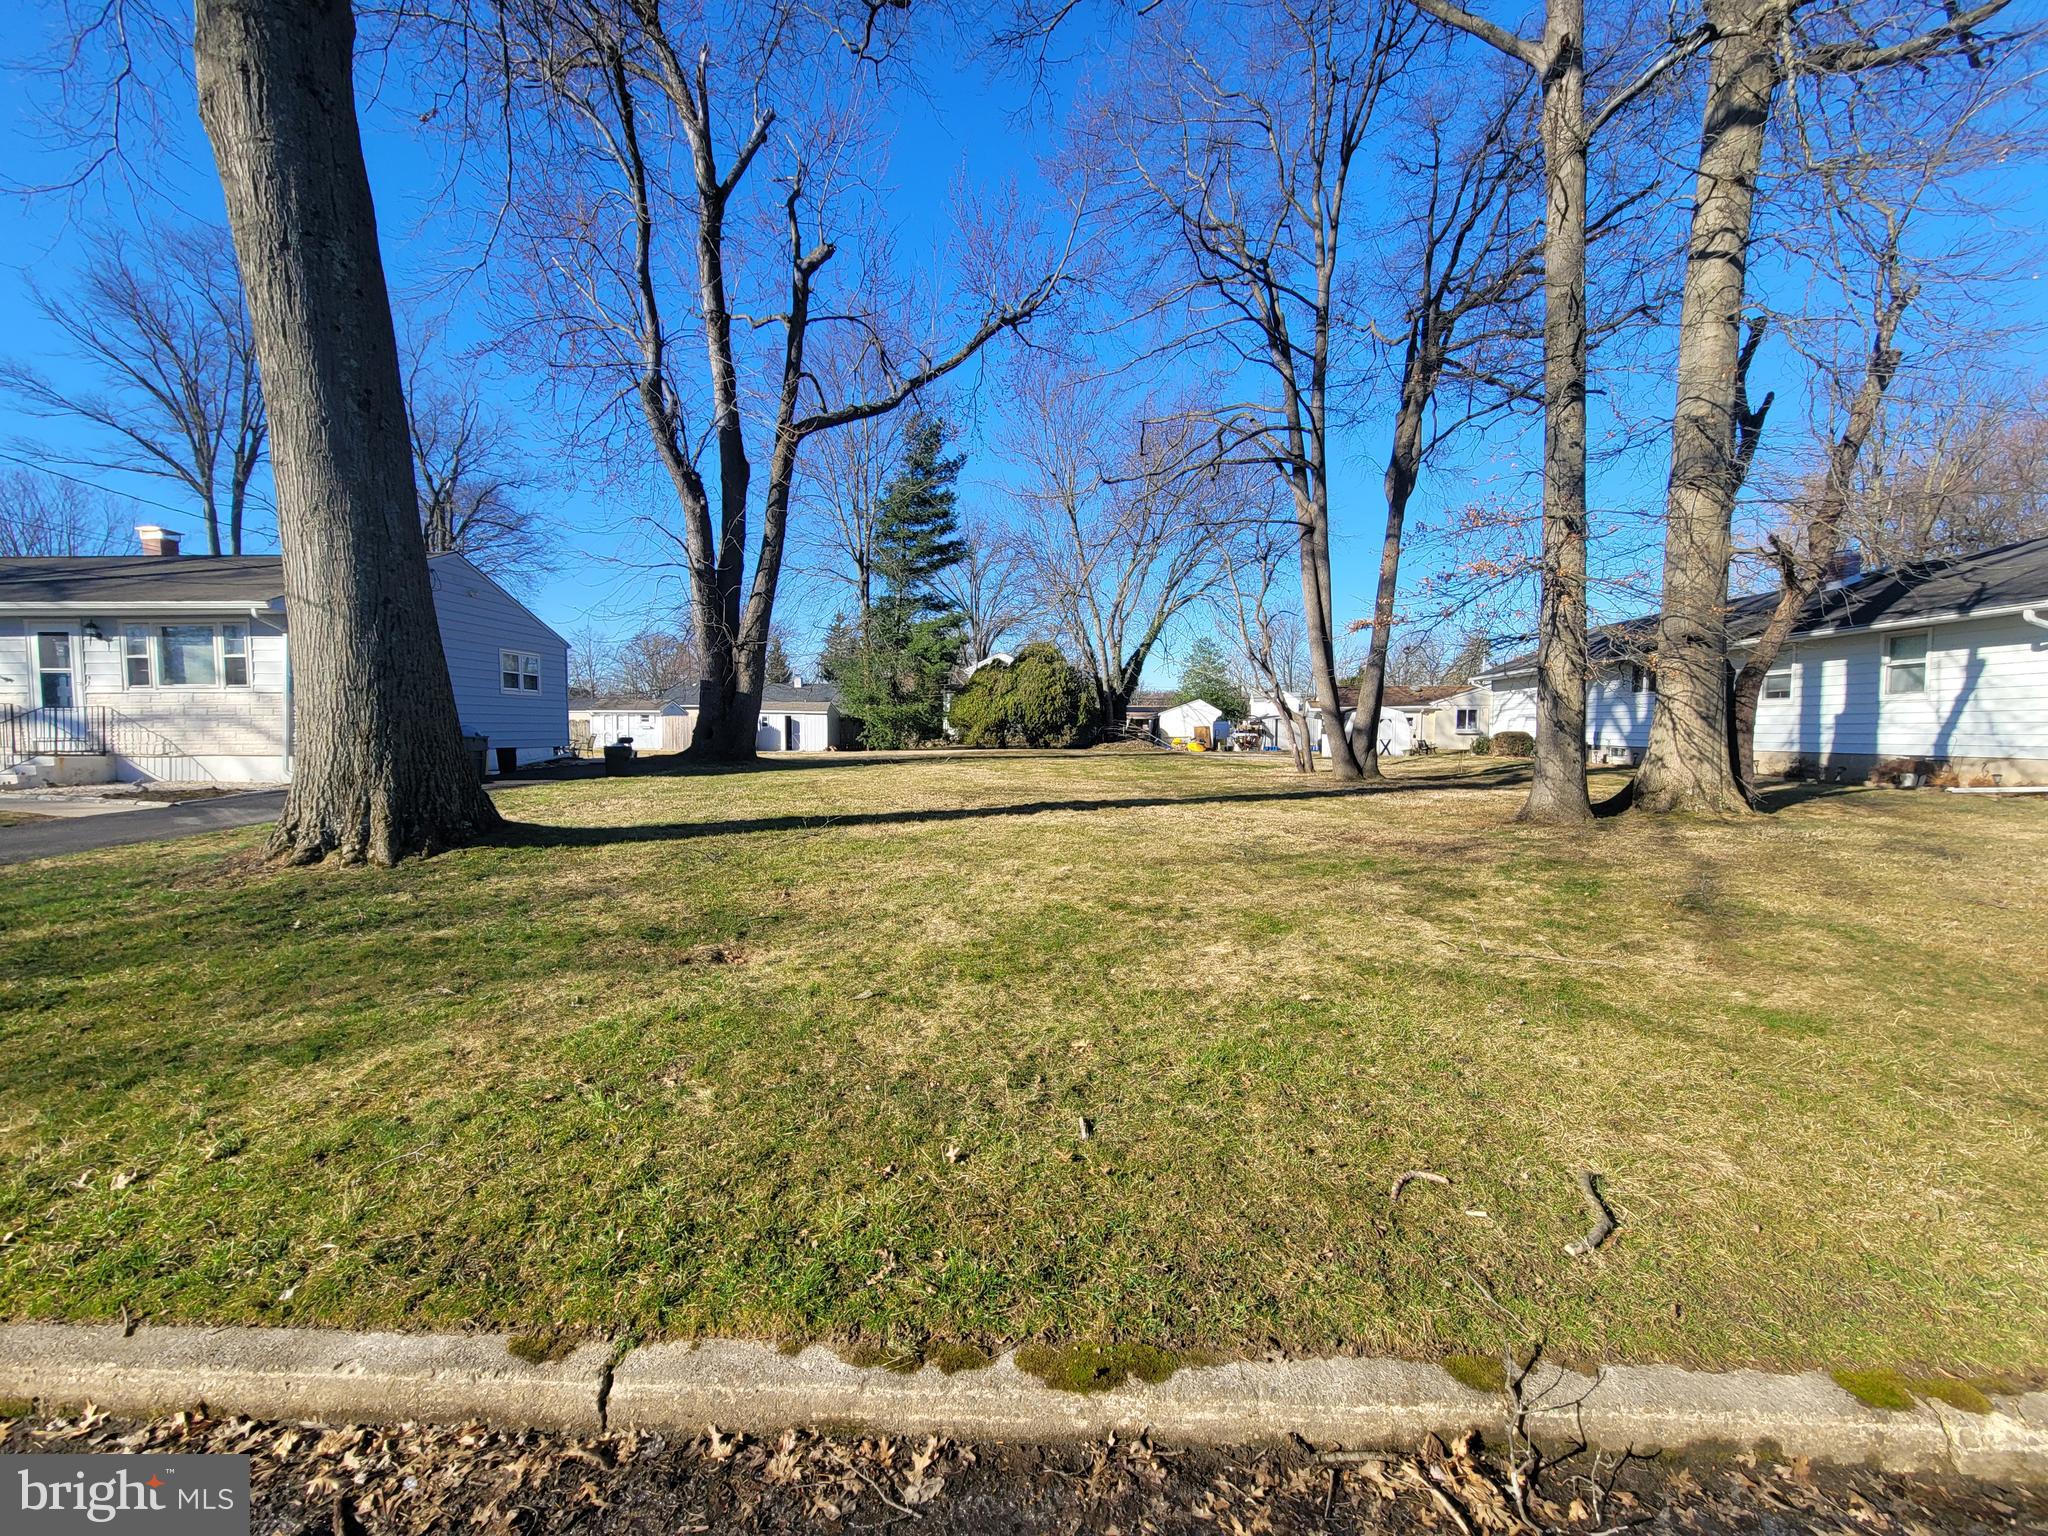 a view of a yard with an tree